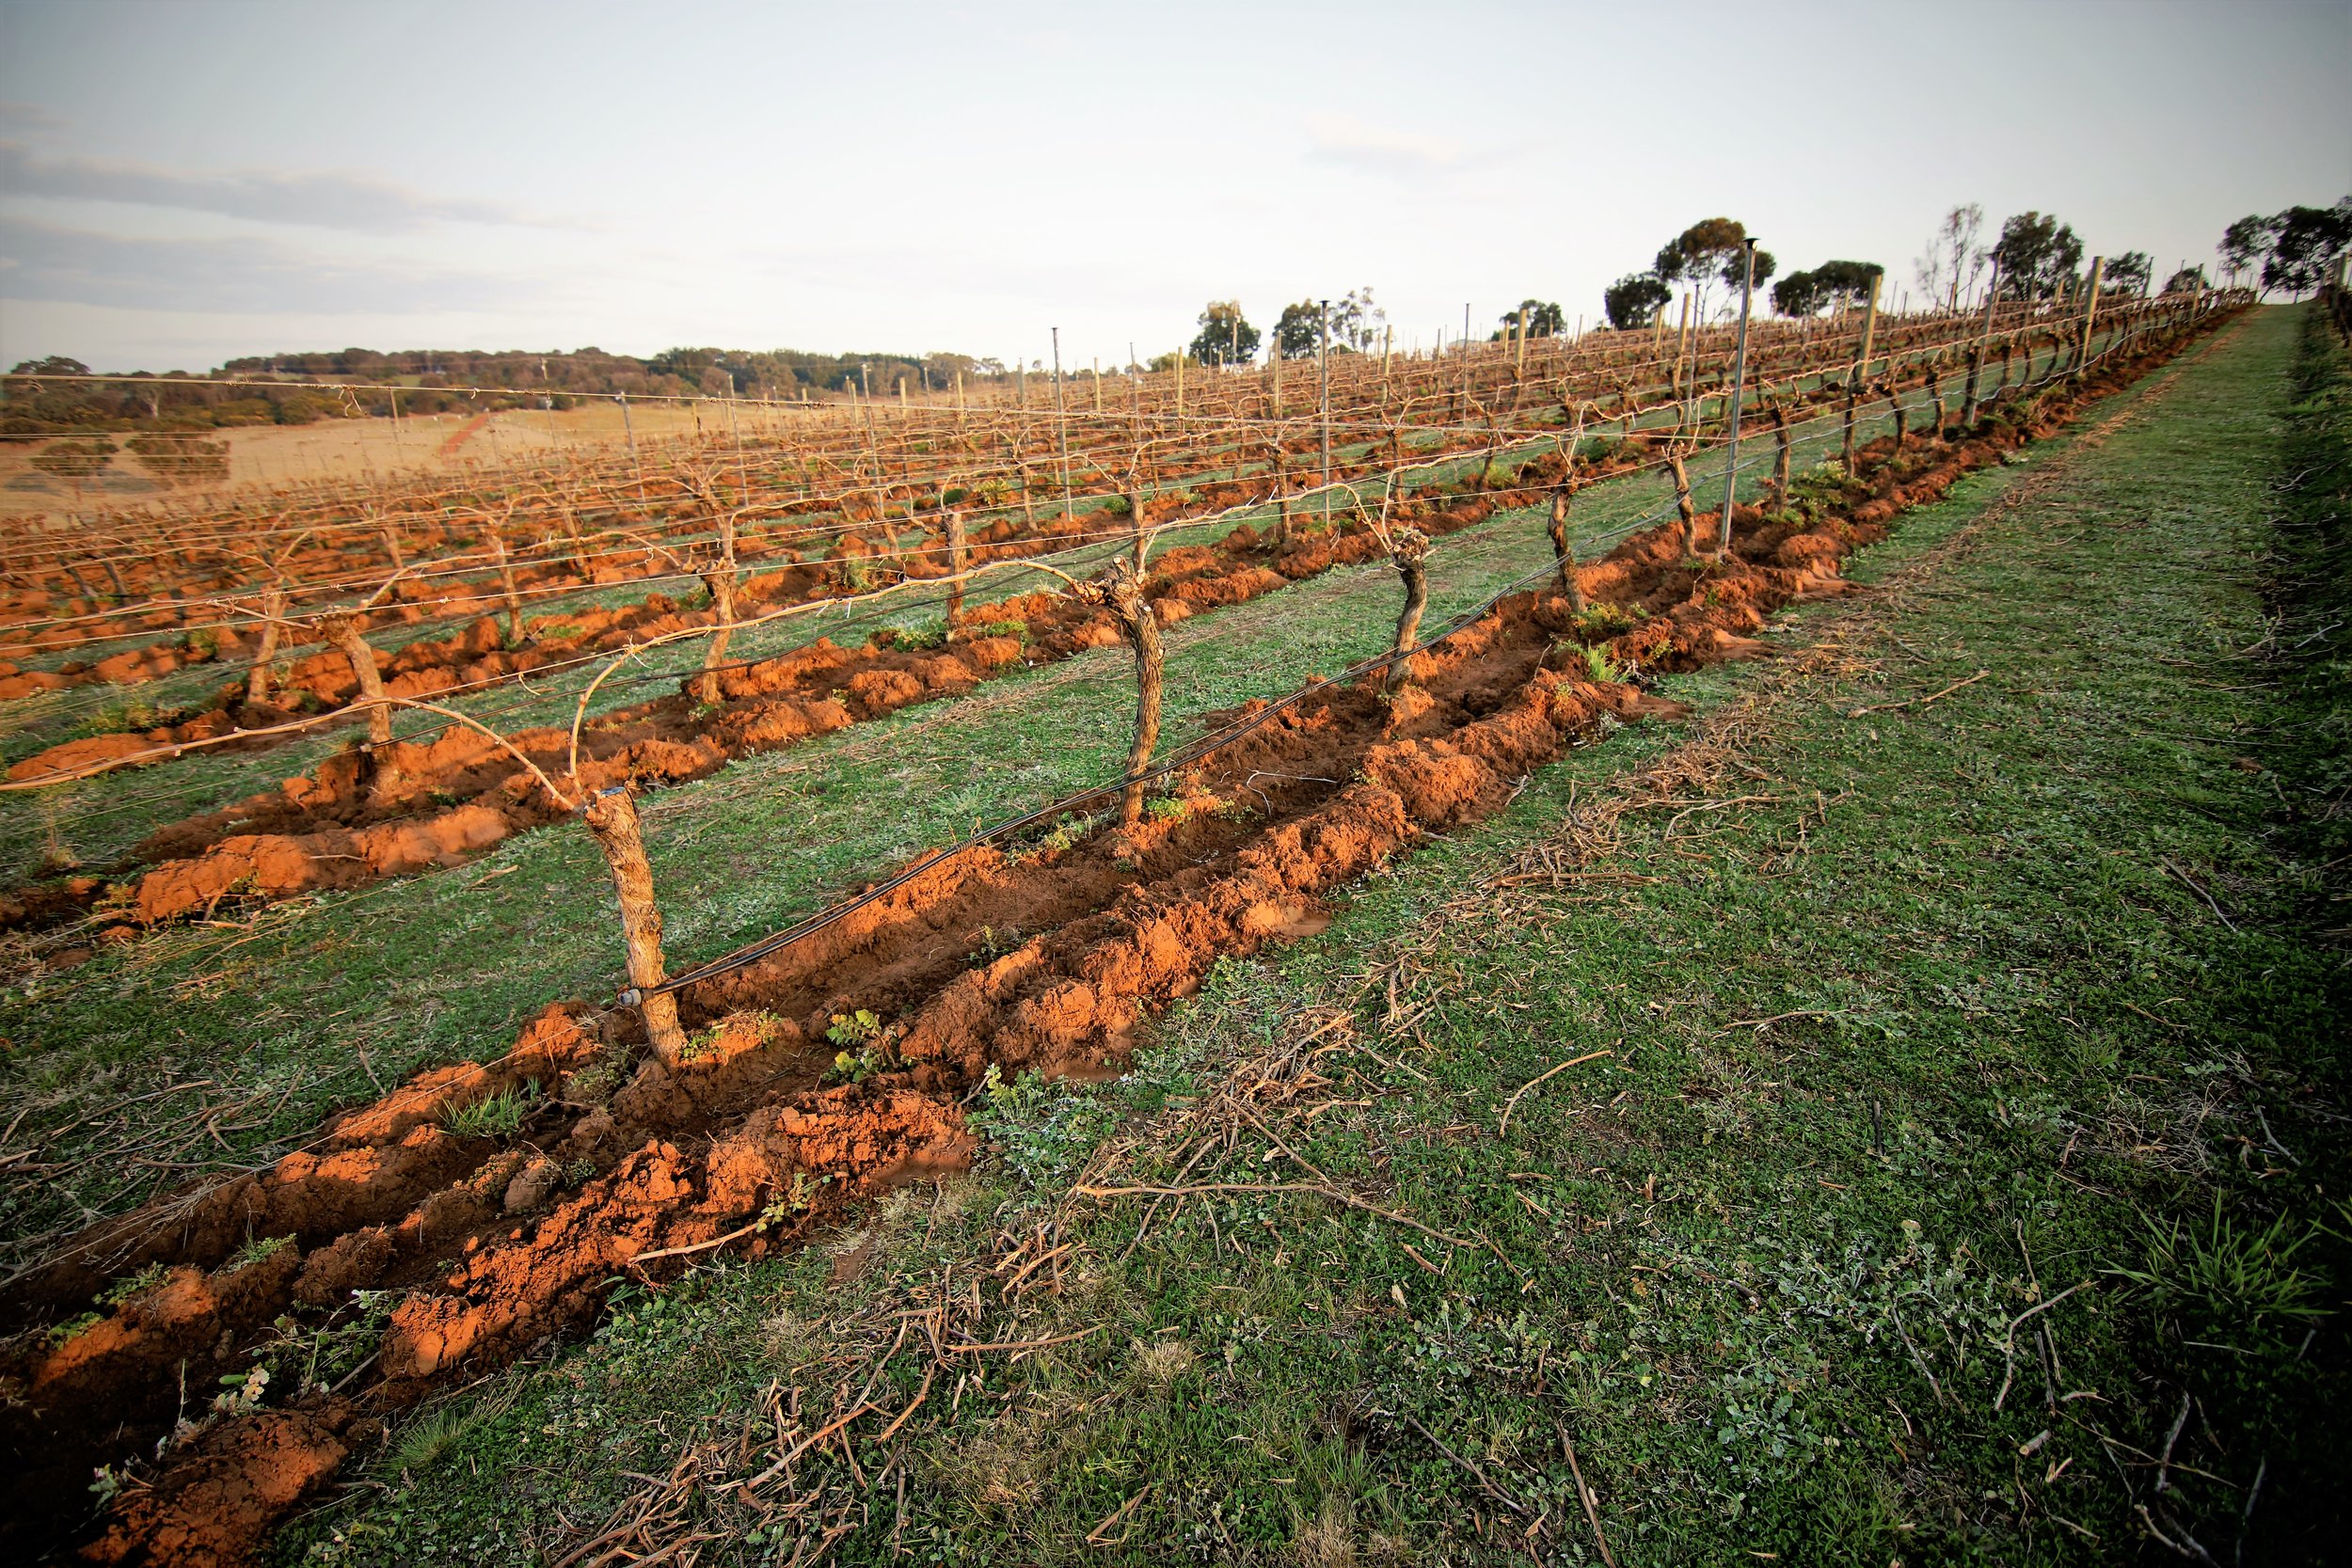 Vineyard Pruned and Cultivated 2015 brightened.jpg